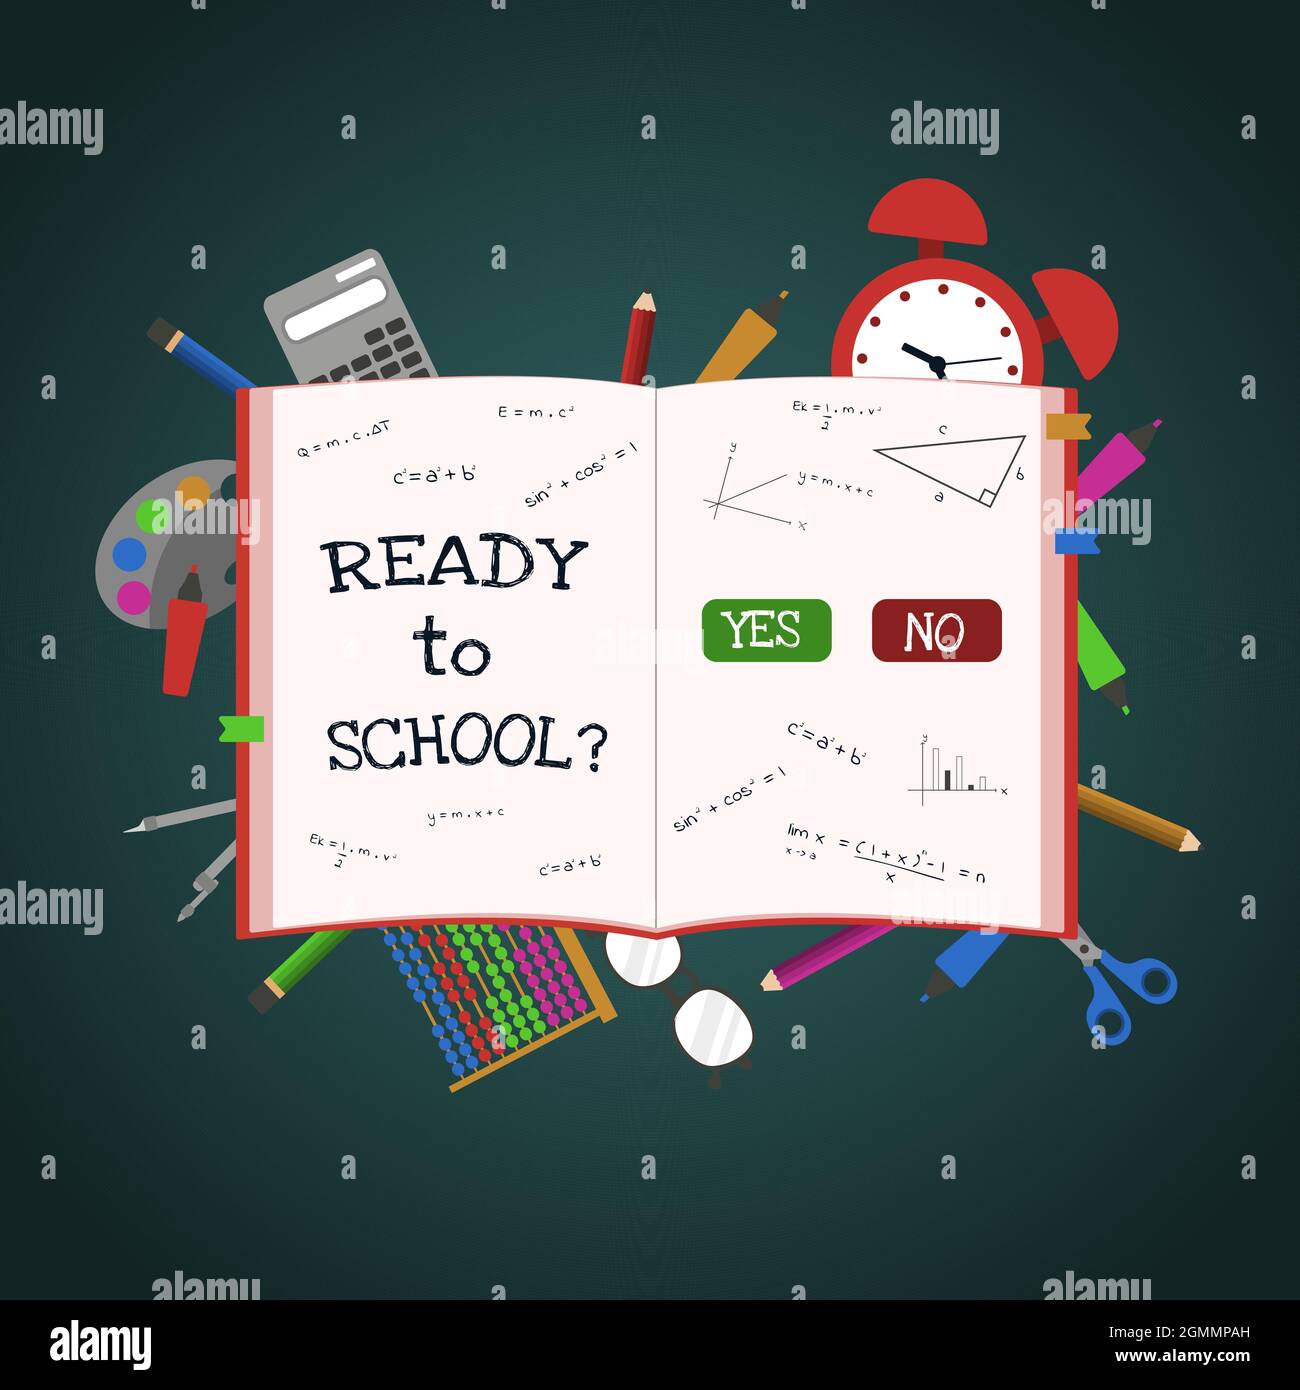 Ready To School Book Study Education Concept Vector Background Stock Vector